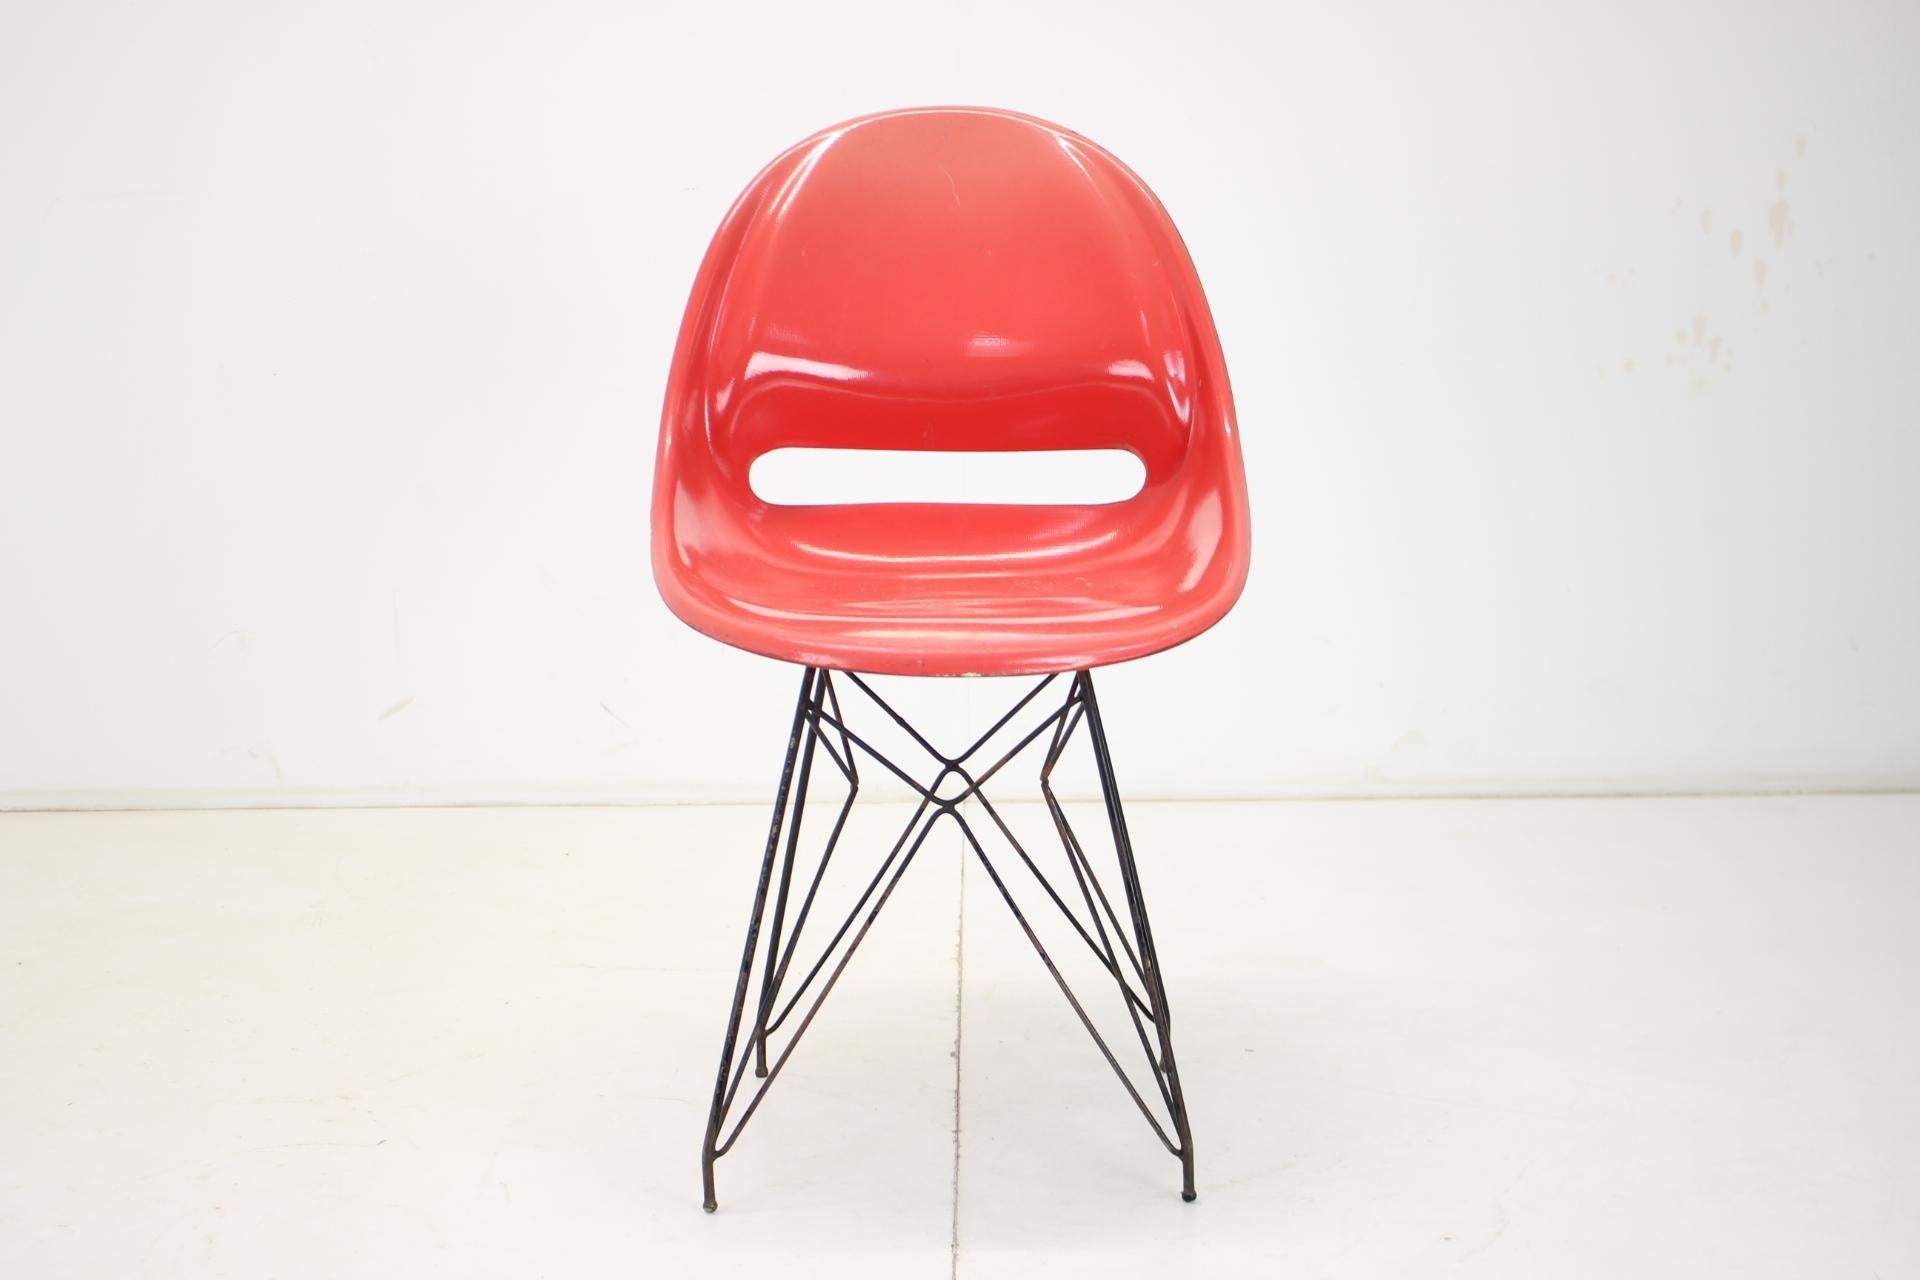 - 1960s
- Czechoslovakia
- Made by Vertex 
- Good original condition
- Has signs of use
- publicated in catalogues
- Seat hight 44 cm.